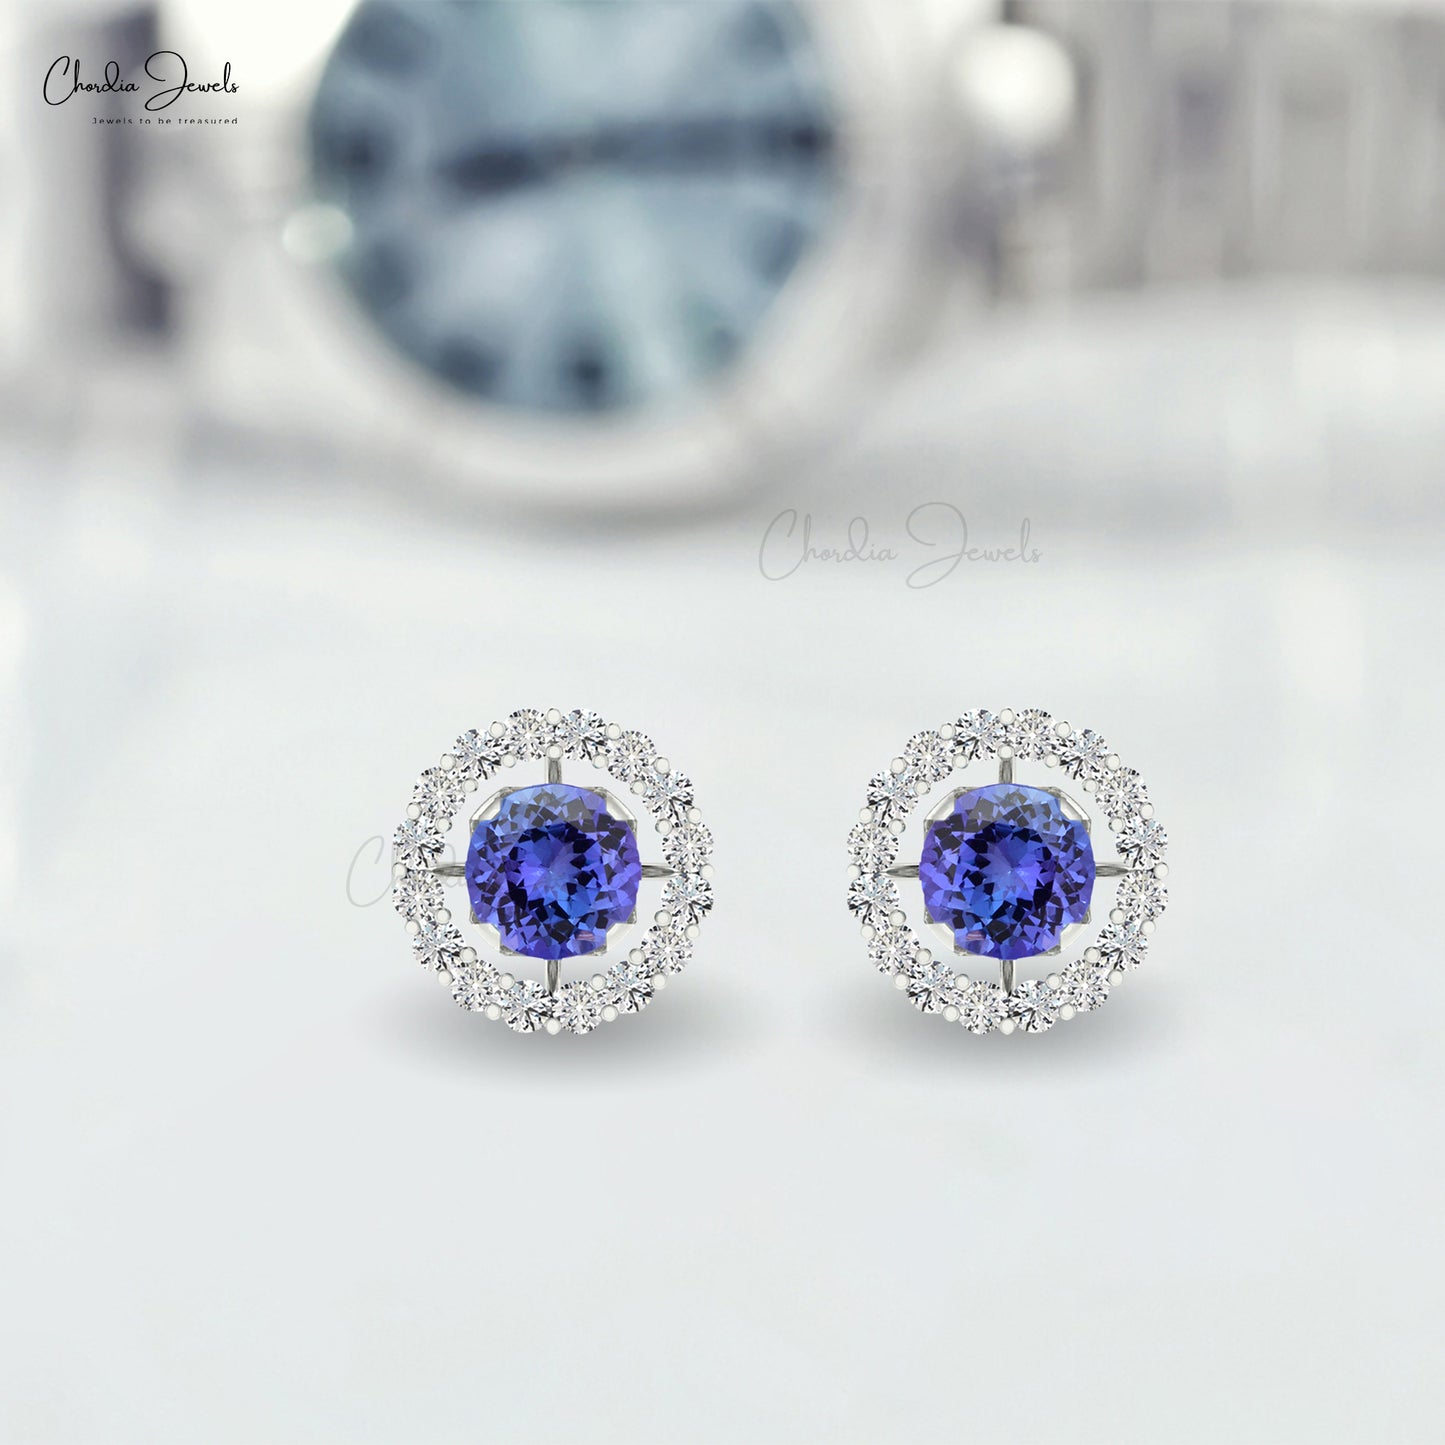 Load image into Gallery viewer, Luxurious Tanzanite Detachable Earrings 14k Real Gold White Diamond Push Back Studs 4mm Round Cut Natural Gemstone Jewelry For Gift
